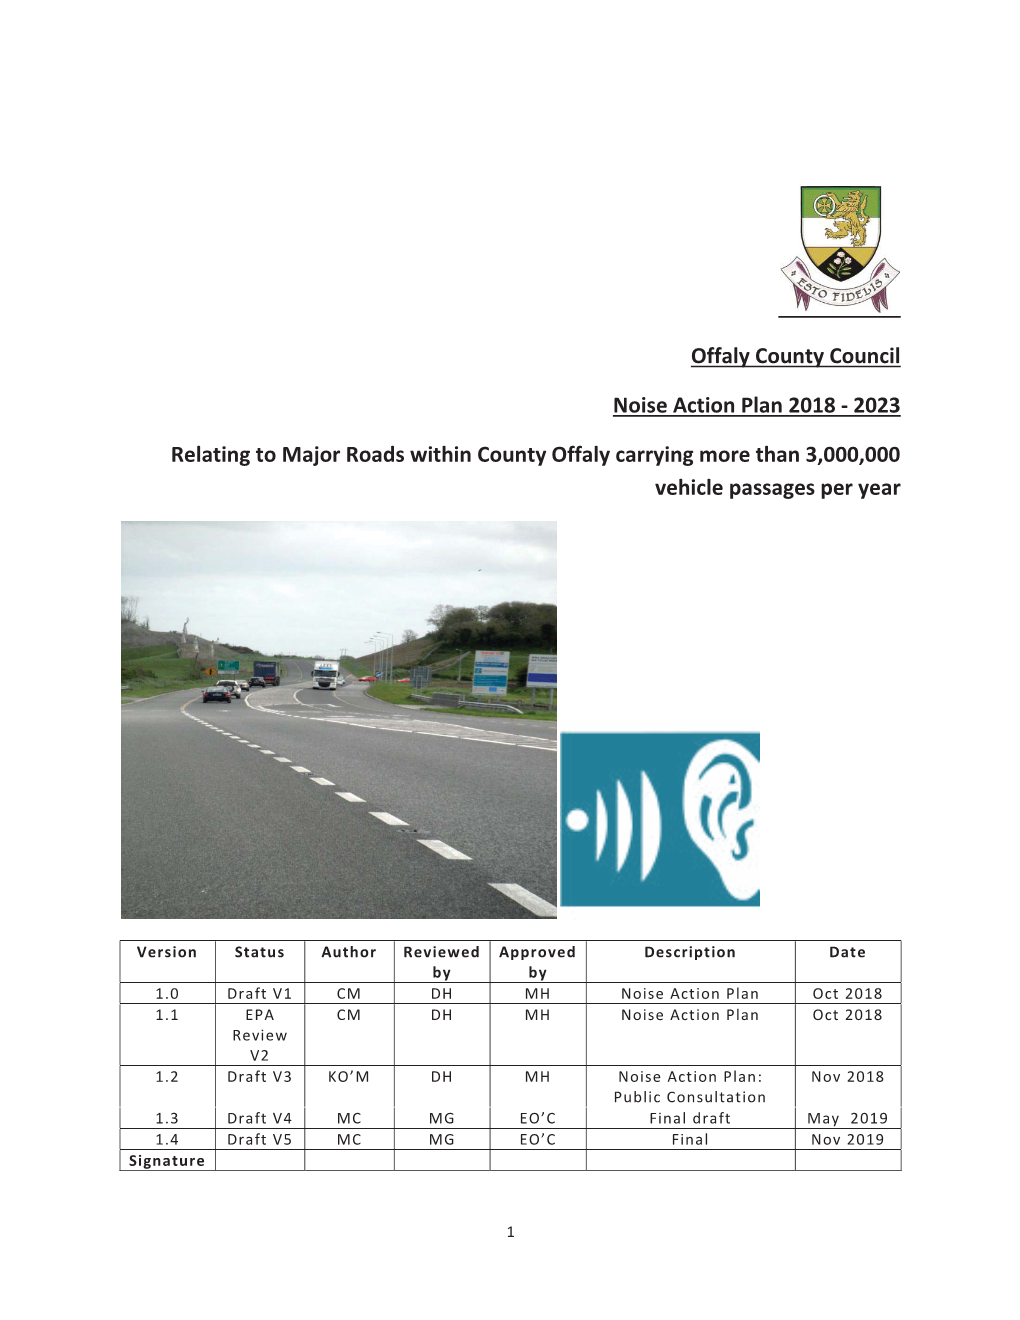 Offaly County Council Noise Action Plan 2018 - 2023 Prepared in Accordance with Environmental Noise Regulations 2006 (SI 140 of 2006)